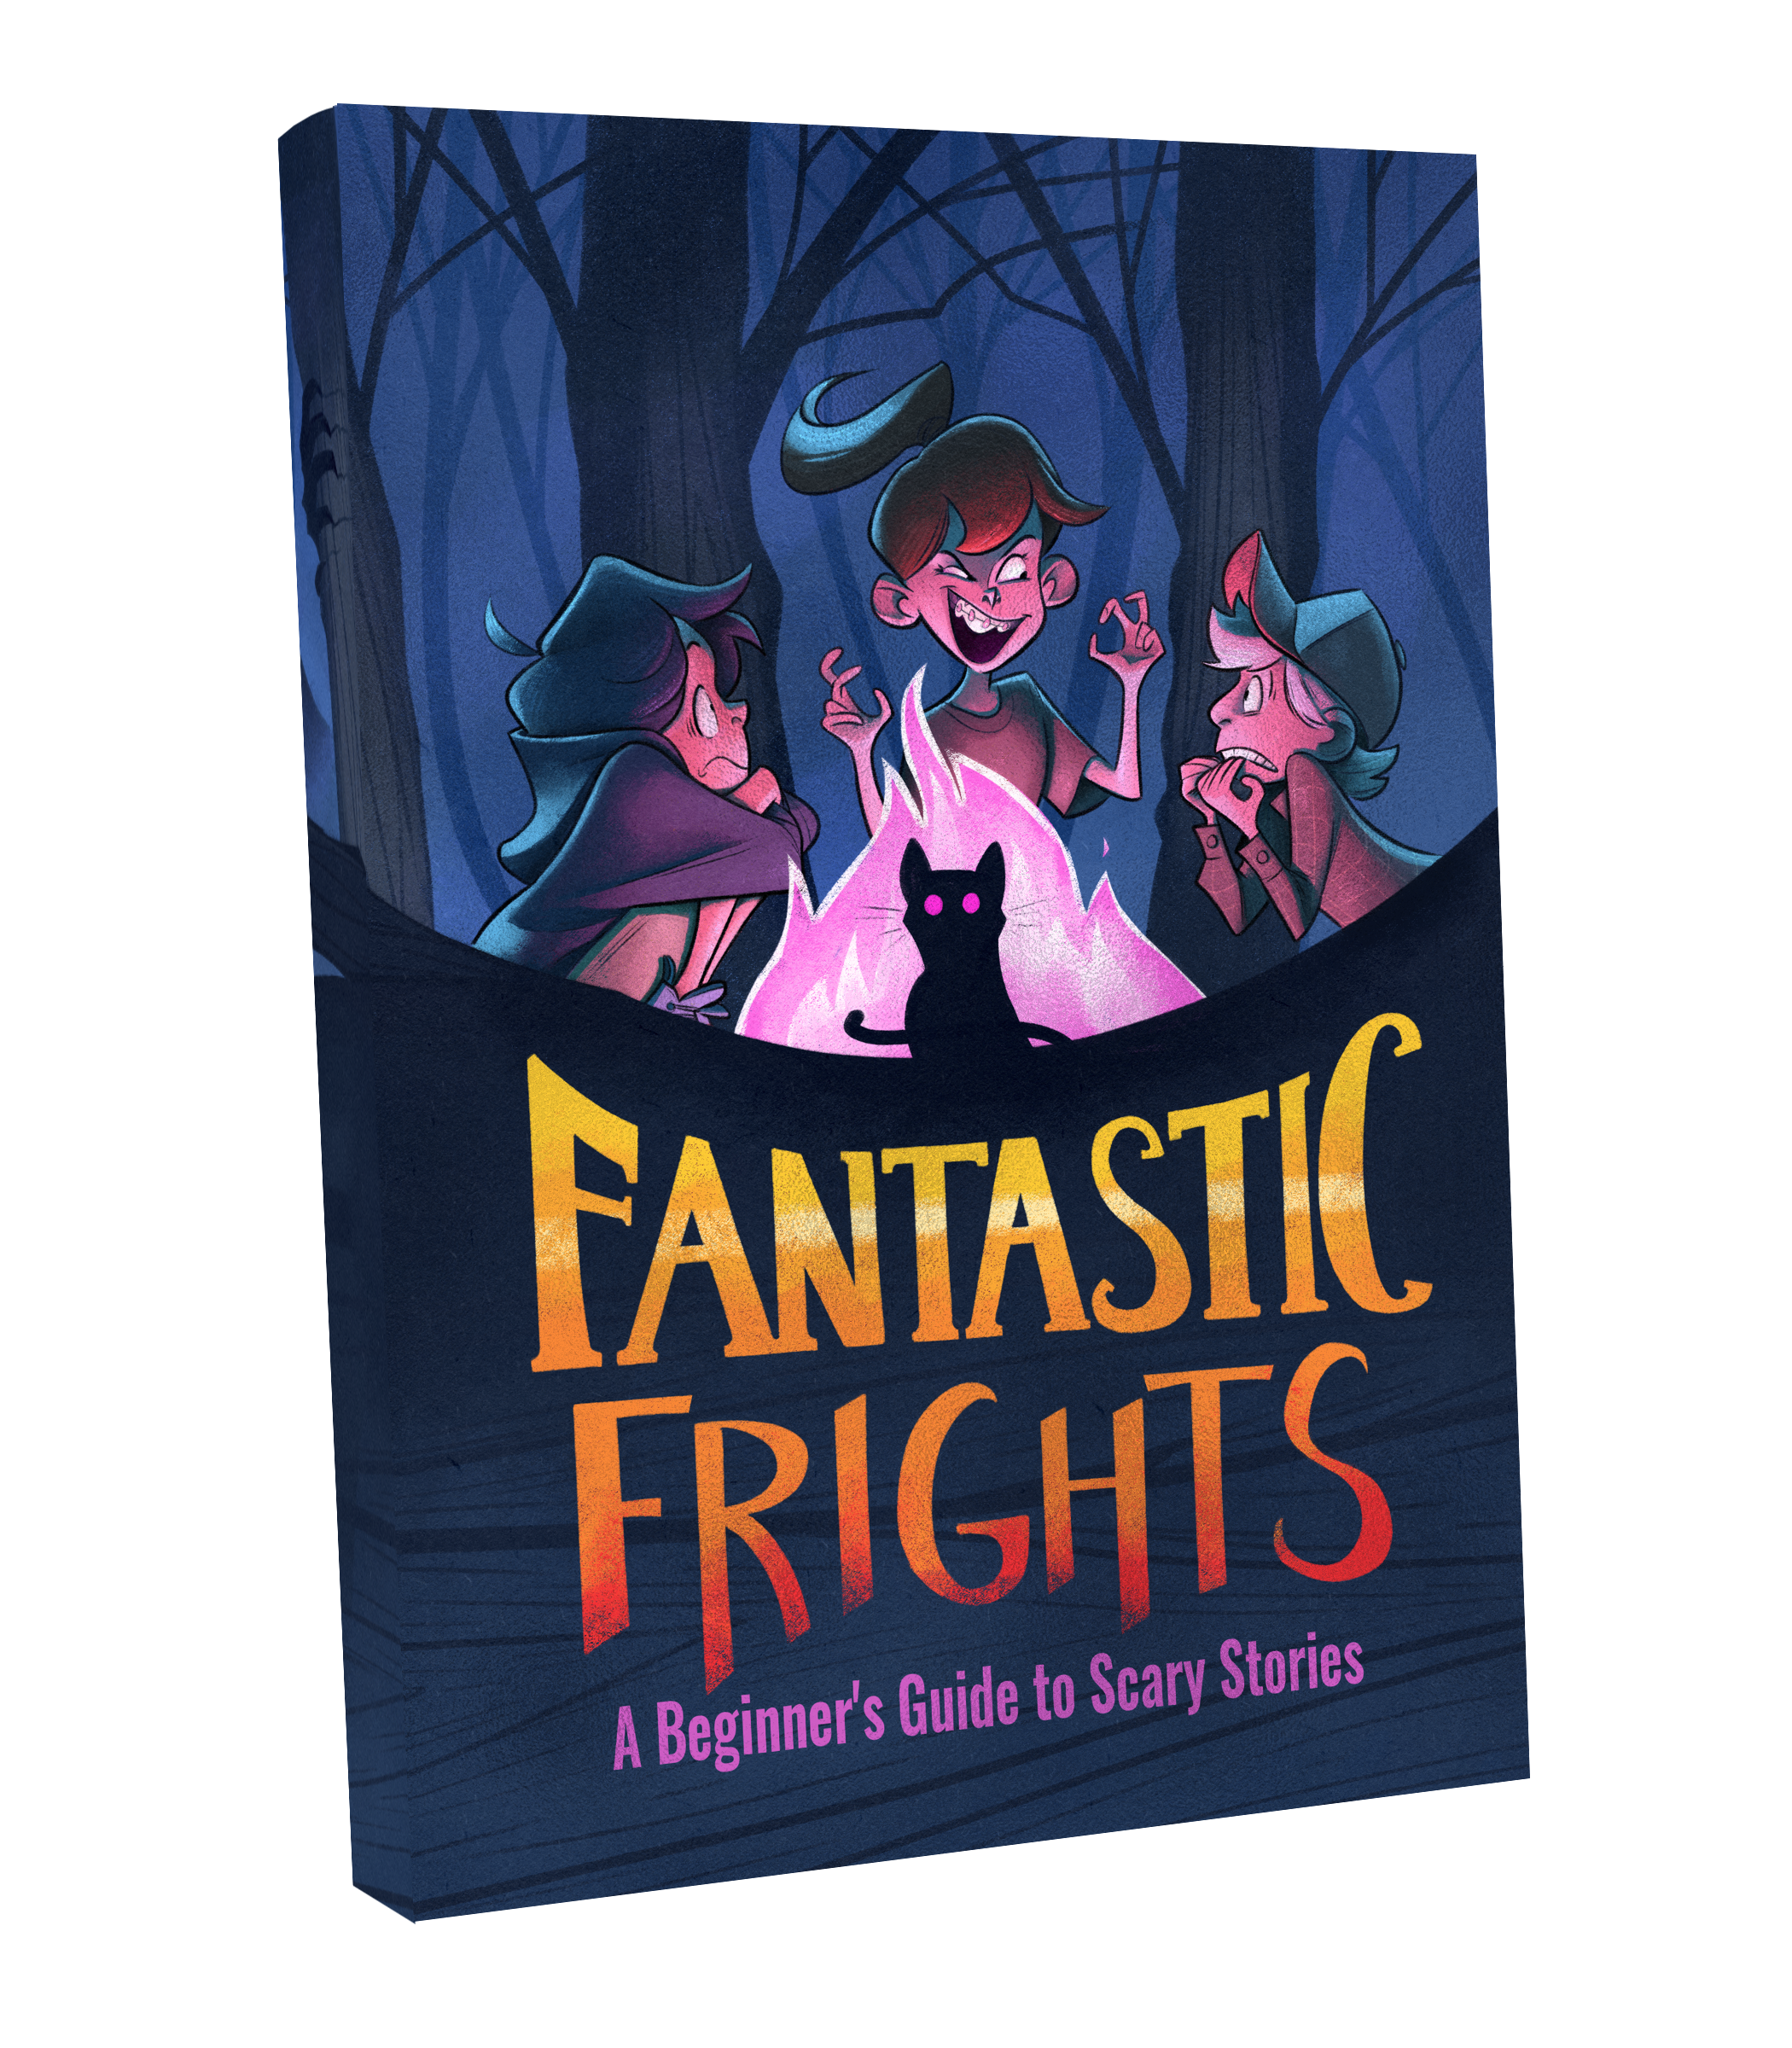 A mock up of Fantastic Frights. Buy now.